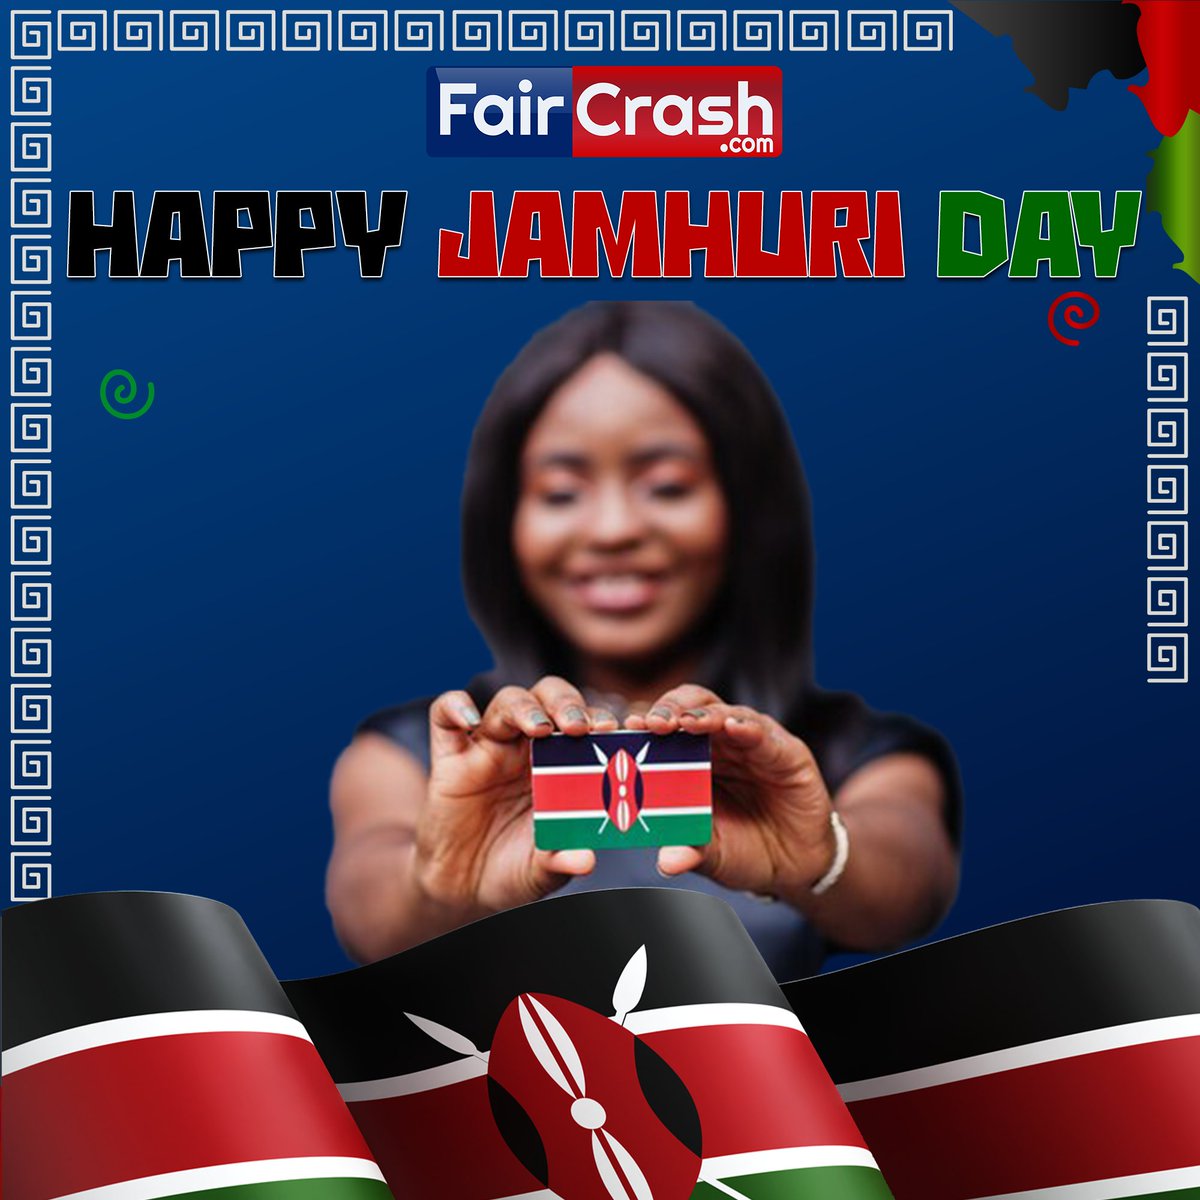 𝐇𝐚𝐩𝐩𝐲 𝐉𝐚𝐦𝐡𝐮𝐫𝐢 𝐃𝐚𝐲, 𝐄𝐯𝐞𝐫𝐲𝐨𝐧𝐞!
Let's celebrate the spirit of freedom and unity together. Wishing you a day filled with joy, laughter and moments to cherish. 
#JamhuriDay #KenyaIndependence #CelebrateFreedom 🇰🇪